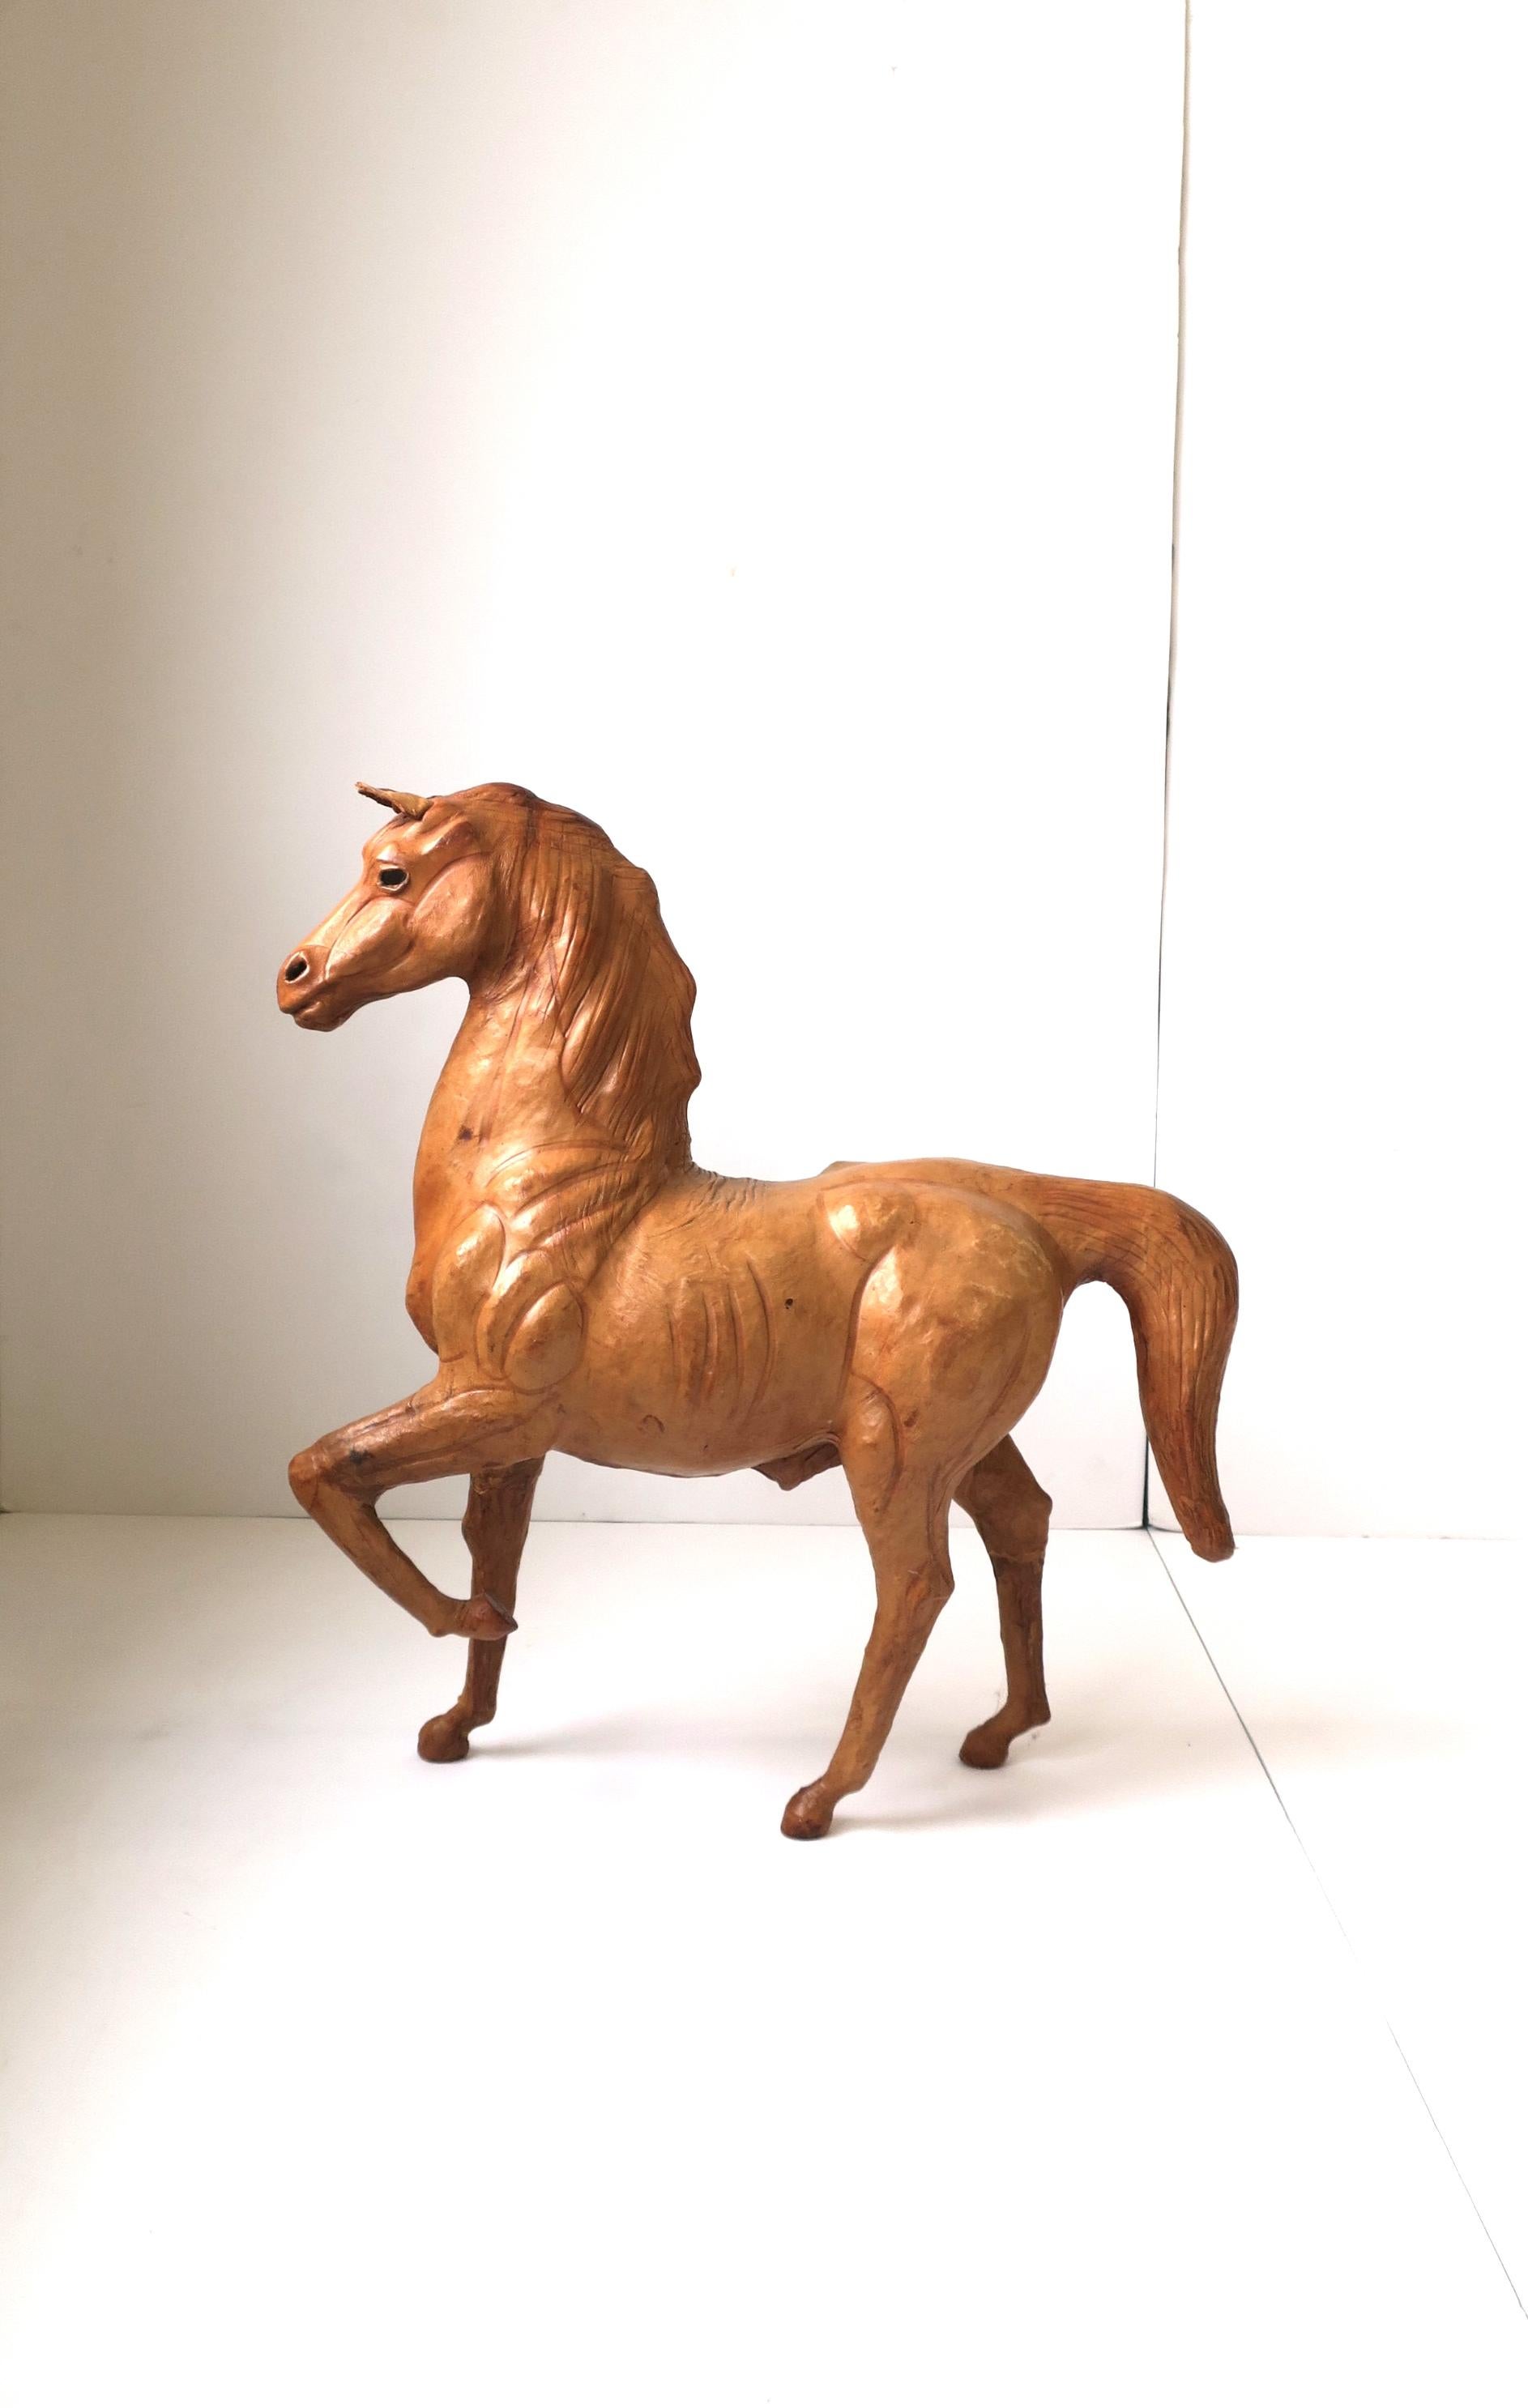 A beautiful all leather horse equine animal sculpture, circa late-20th century. This hand-crafted piece is clad in a light brown leather with glass eyes. For size perspective, please see image #8. A great decorative object sculpture piece. Piece is